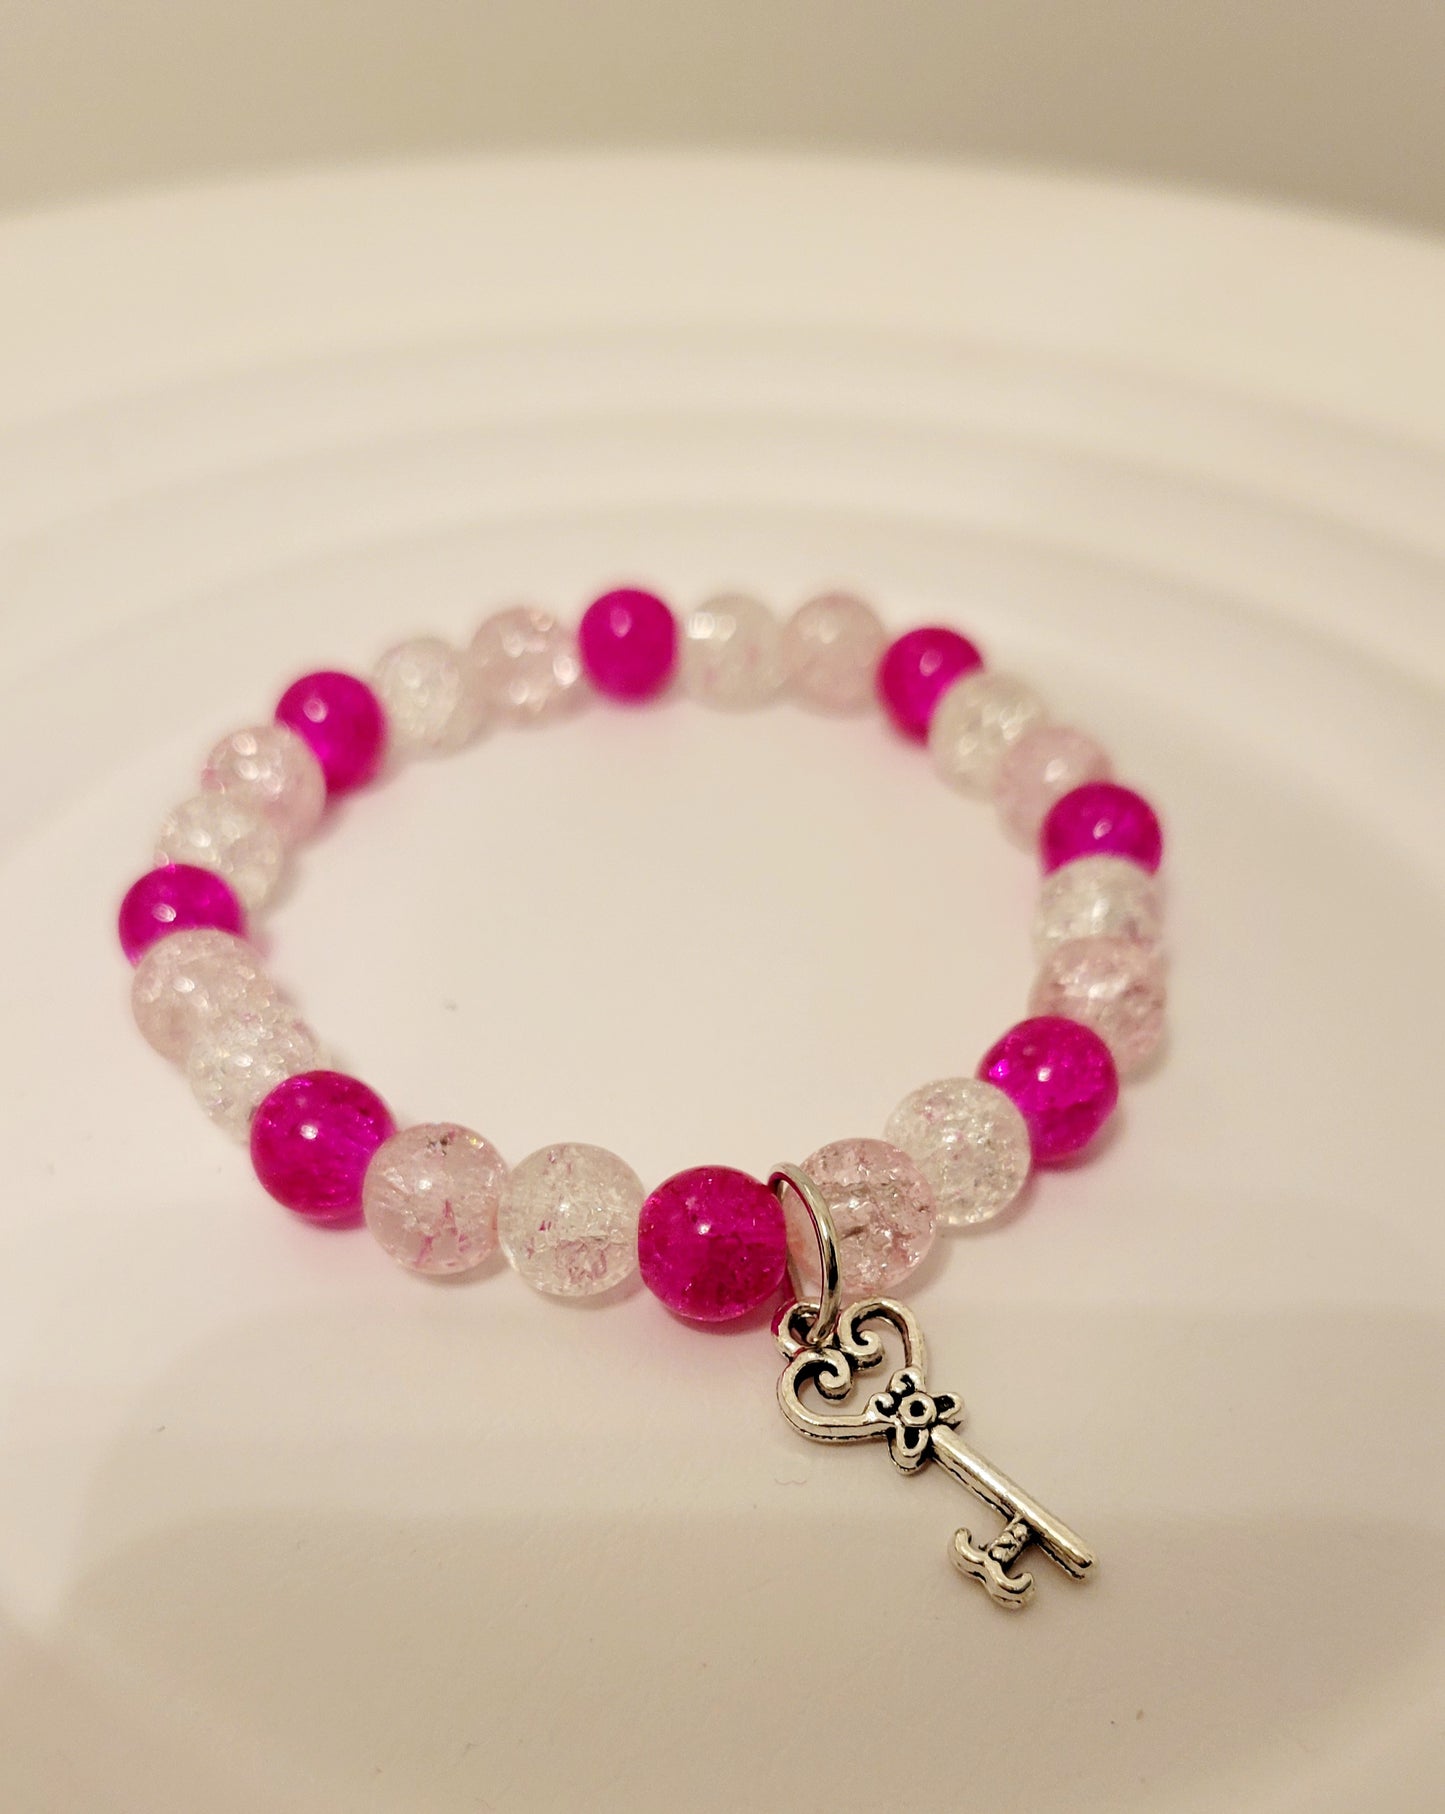 Classic Beaded Bracelets with charms